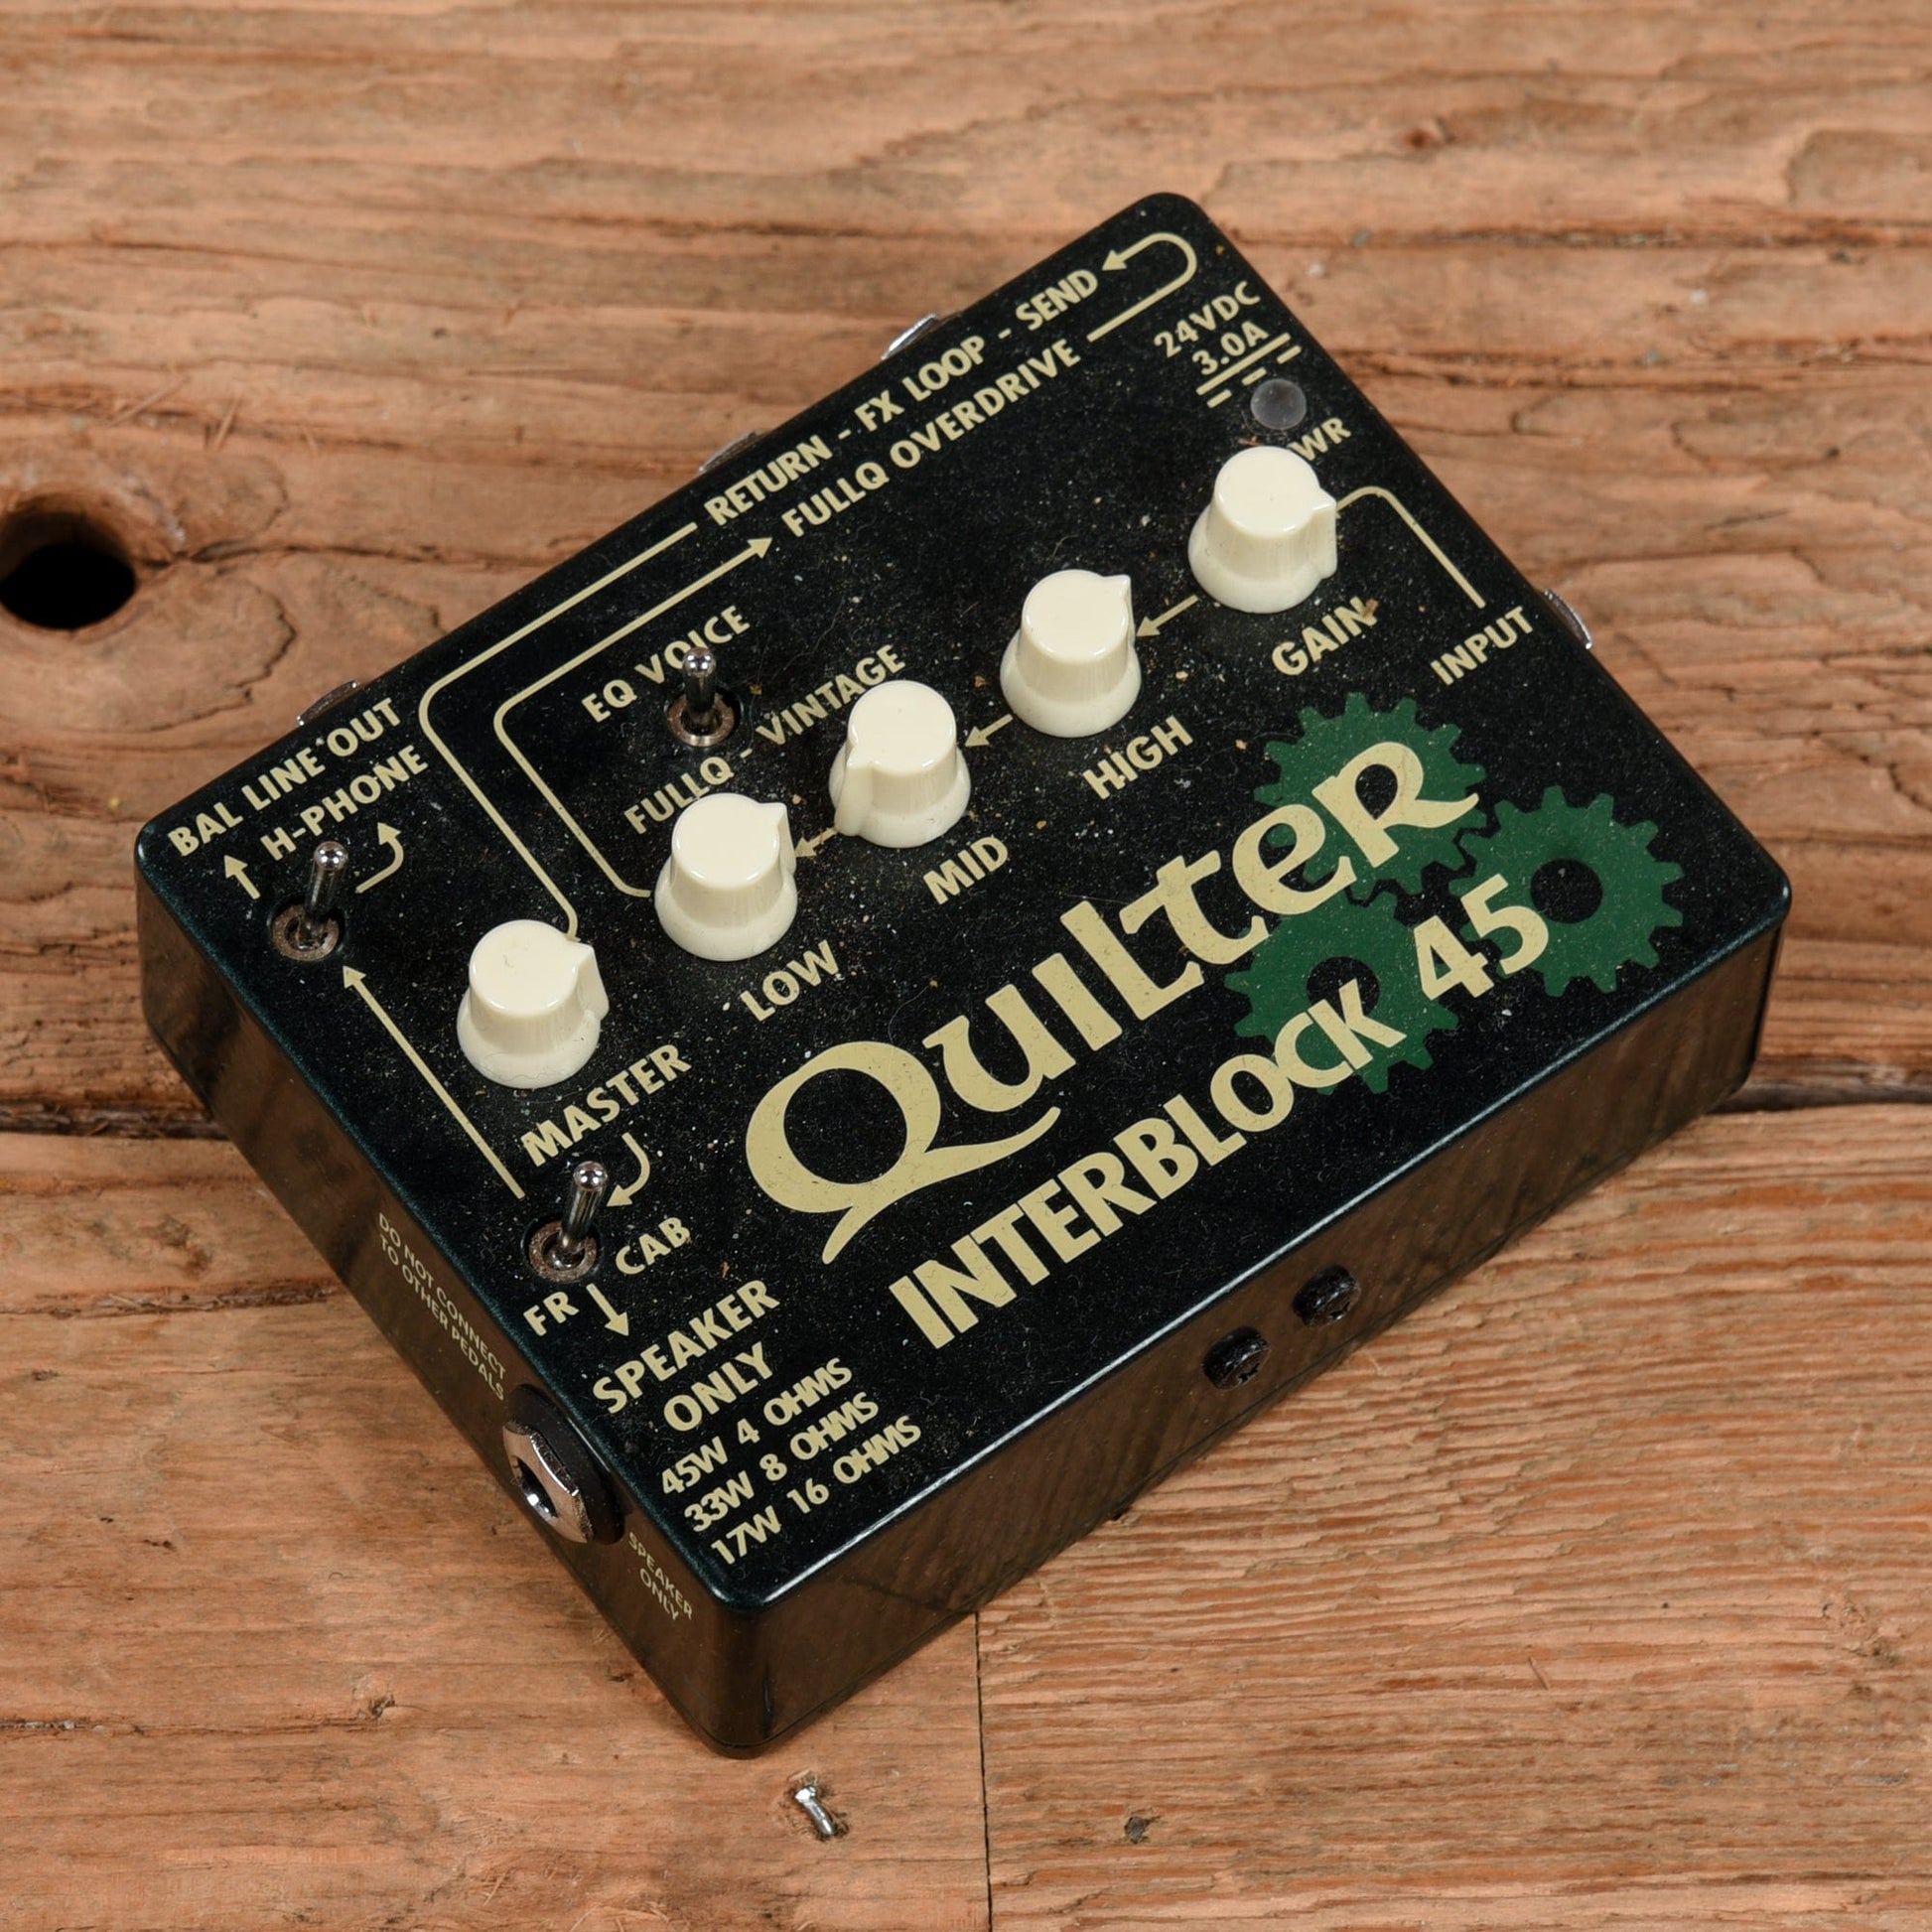 Quilter Labs Interblock 45 Effects and Pedals / Cab Sims